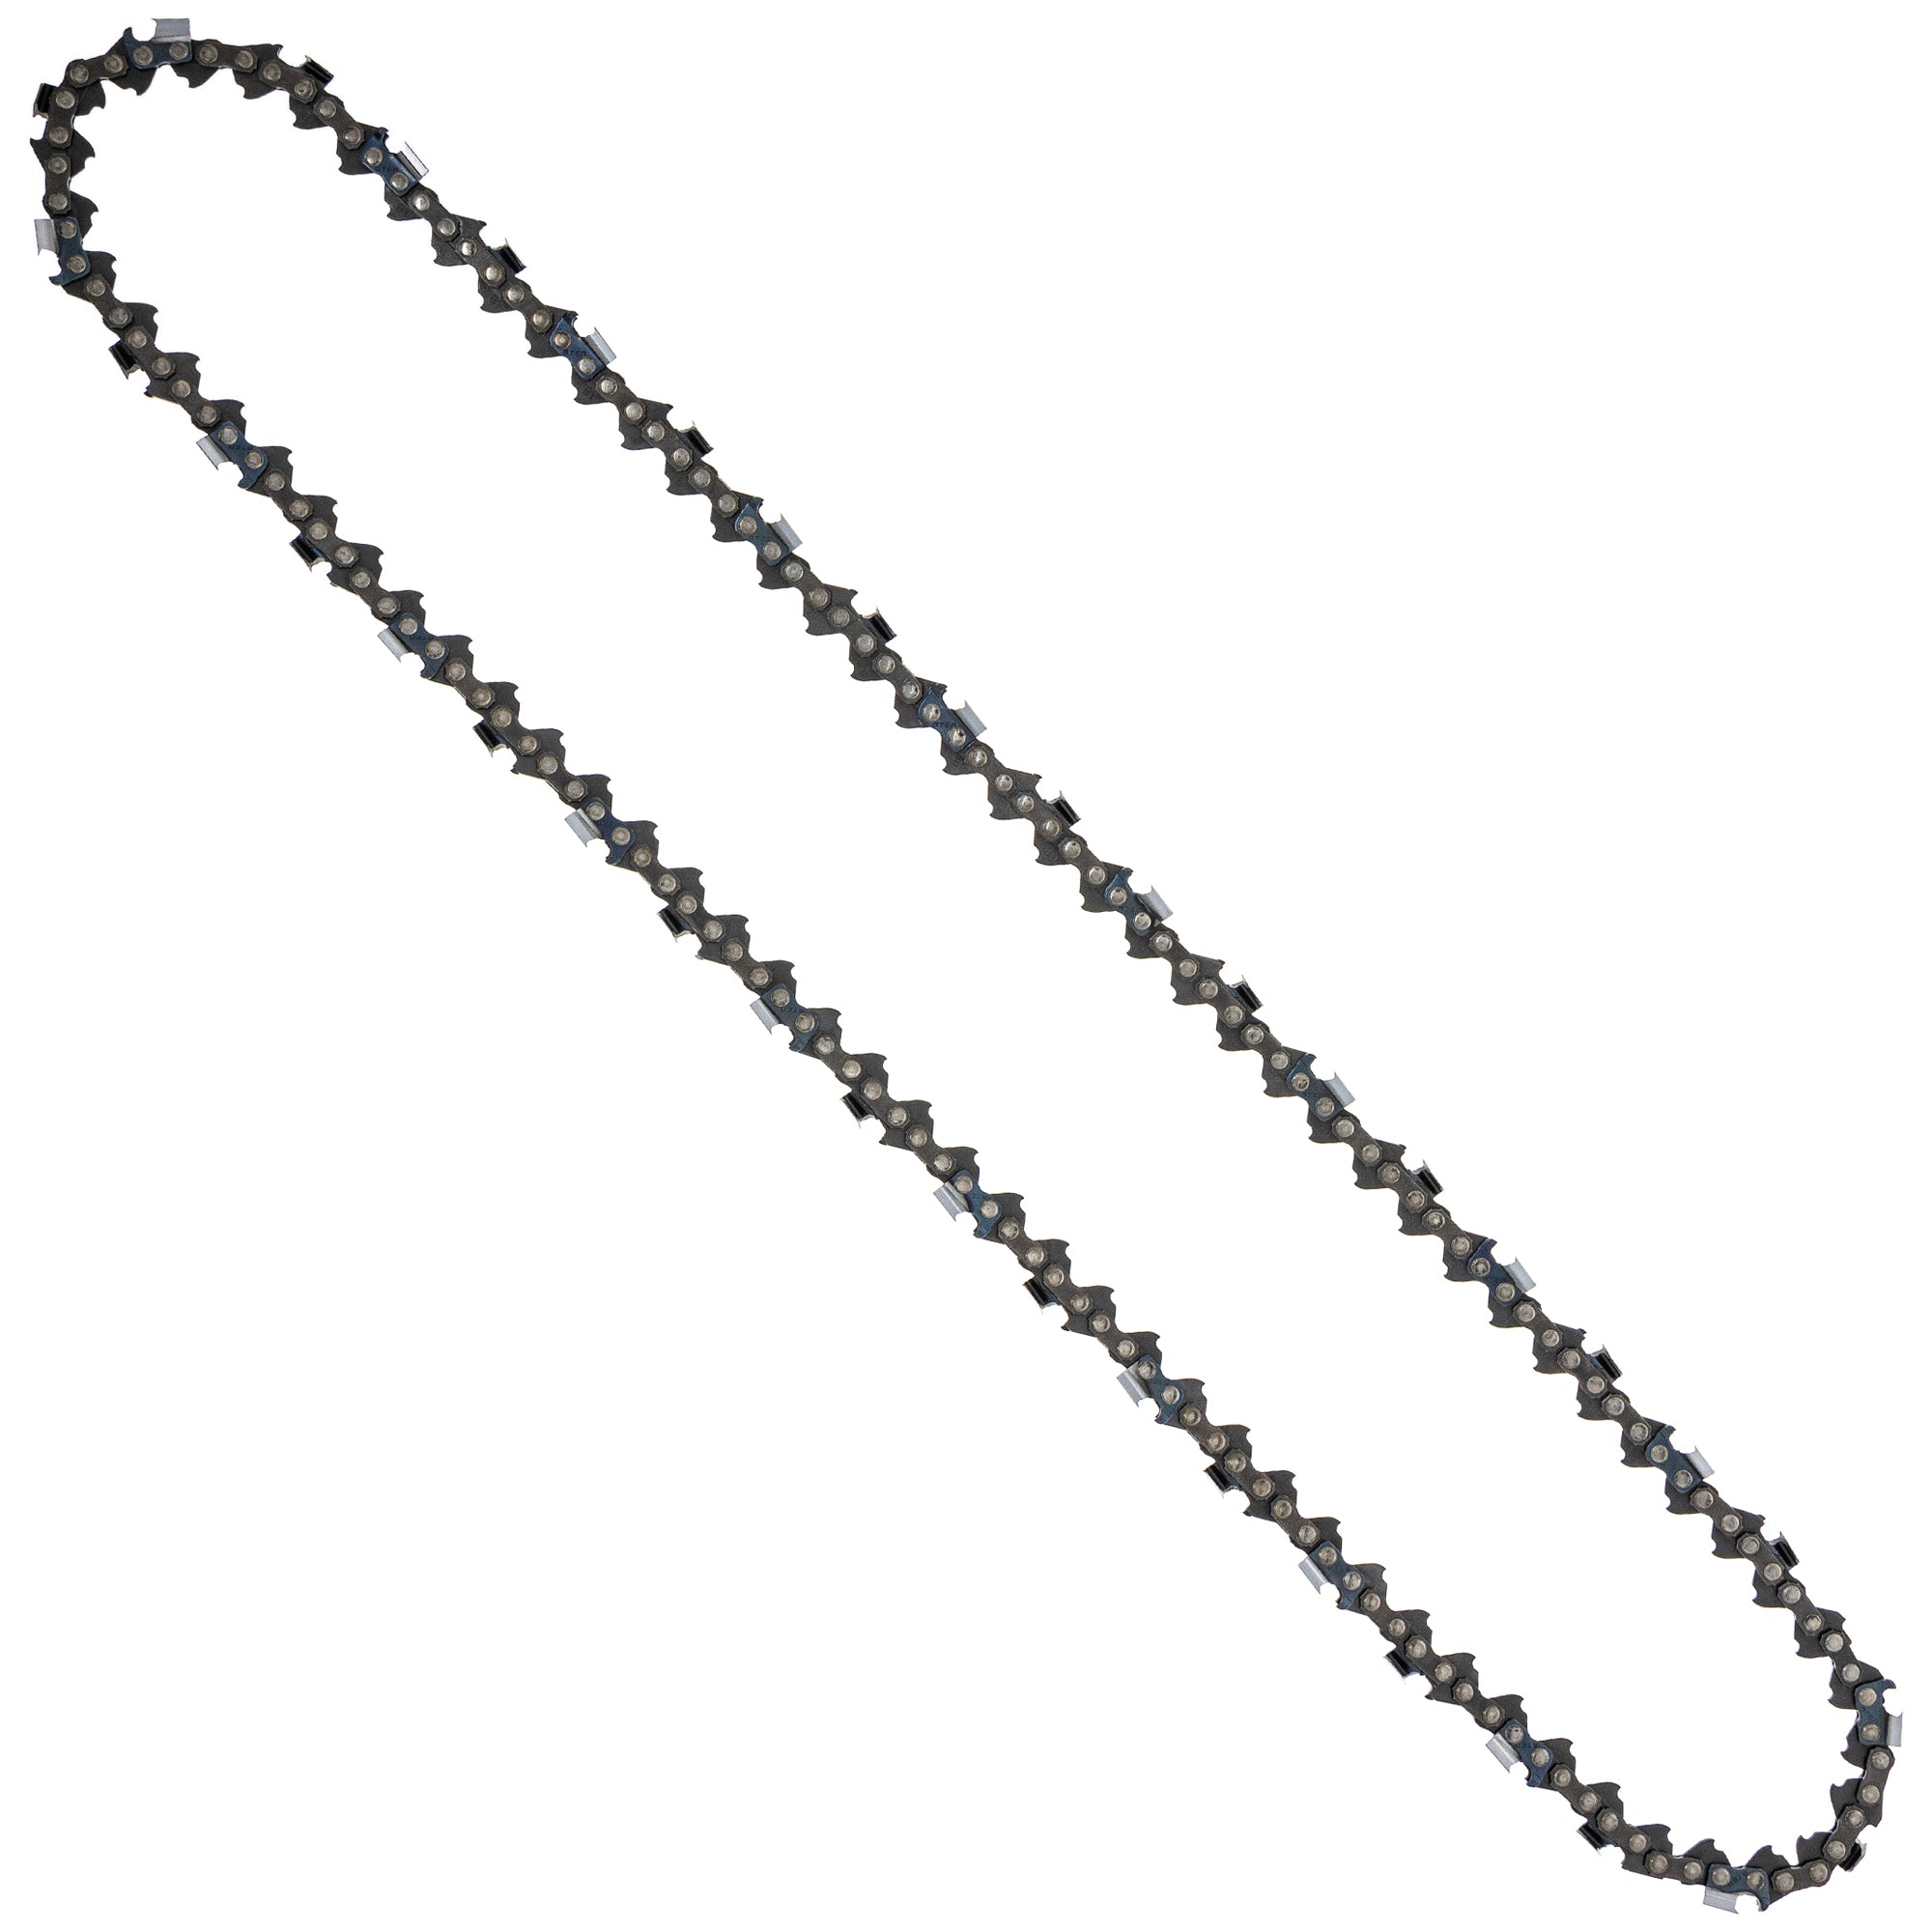 8TEN 810-CCC2310H Chain 3-Pack for zOTHER Oregon MS 634 30 040